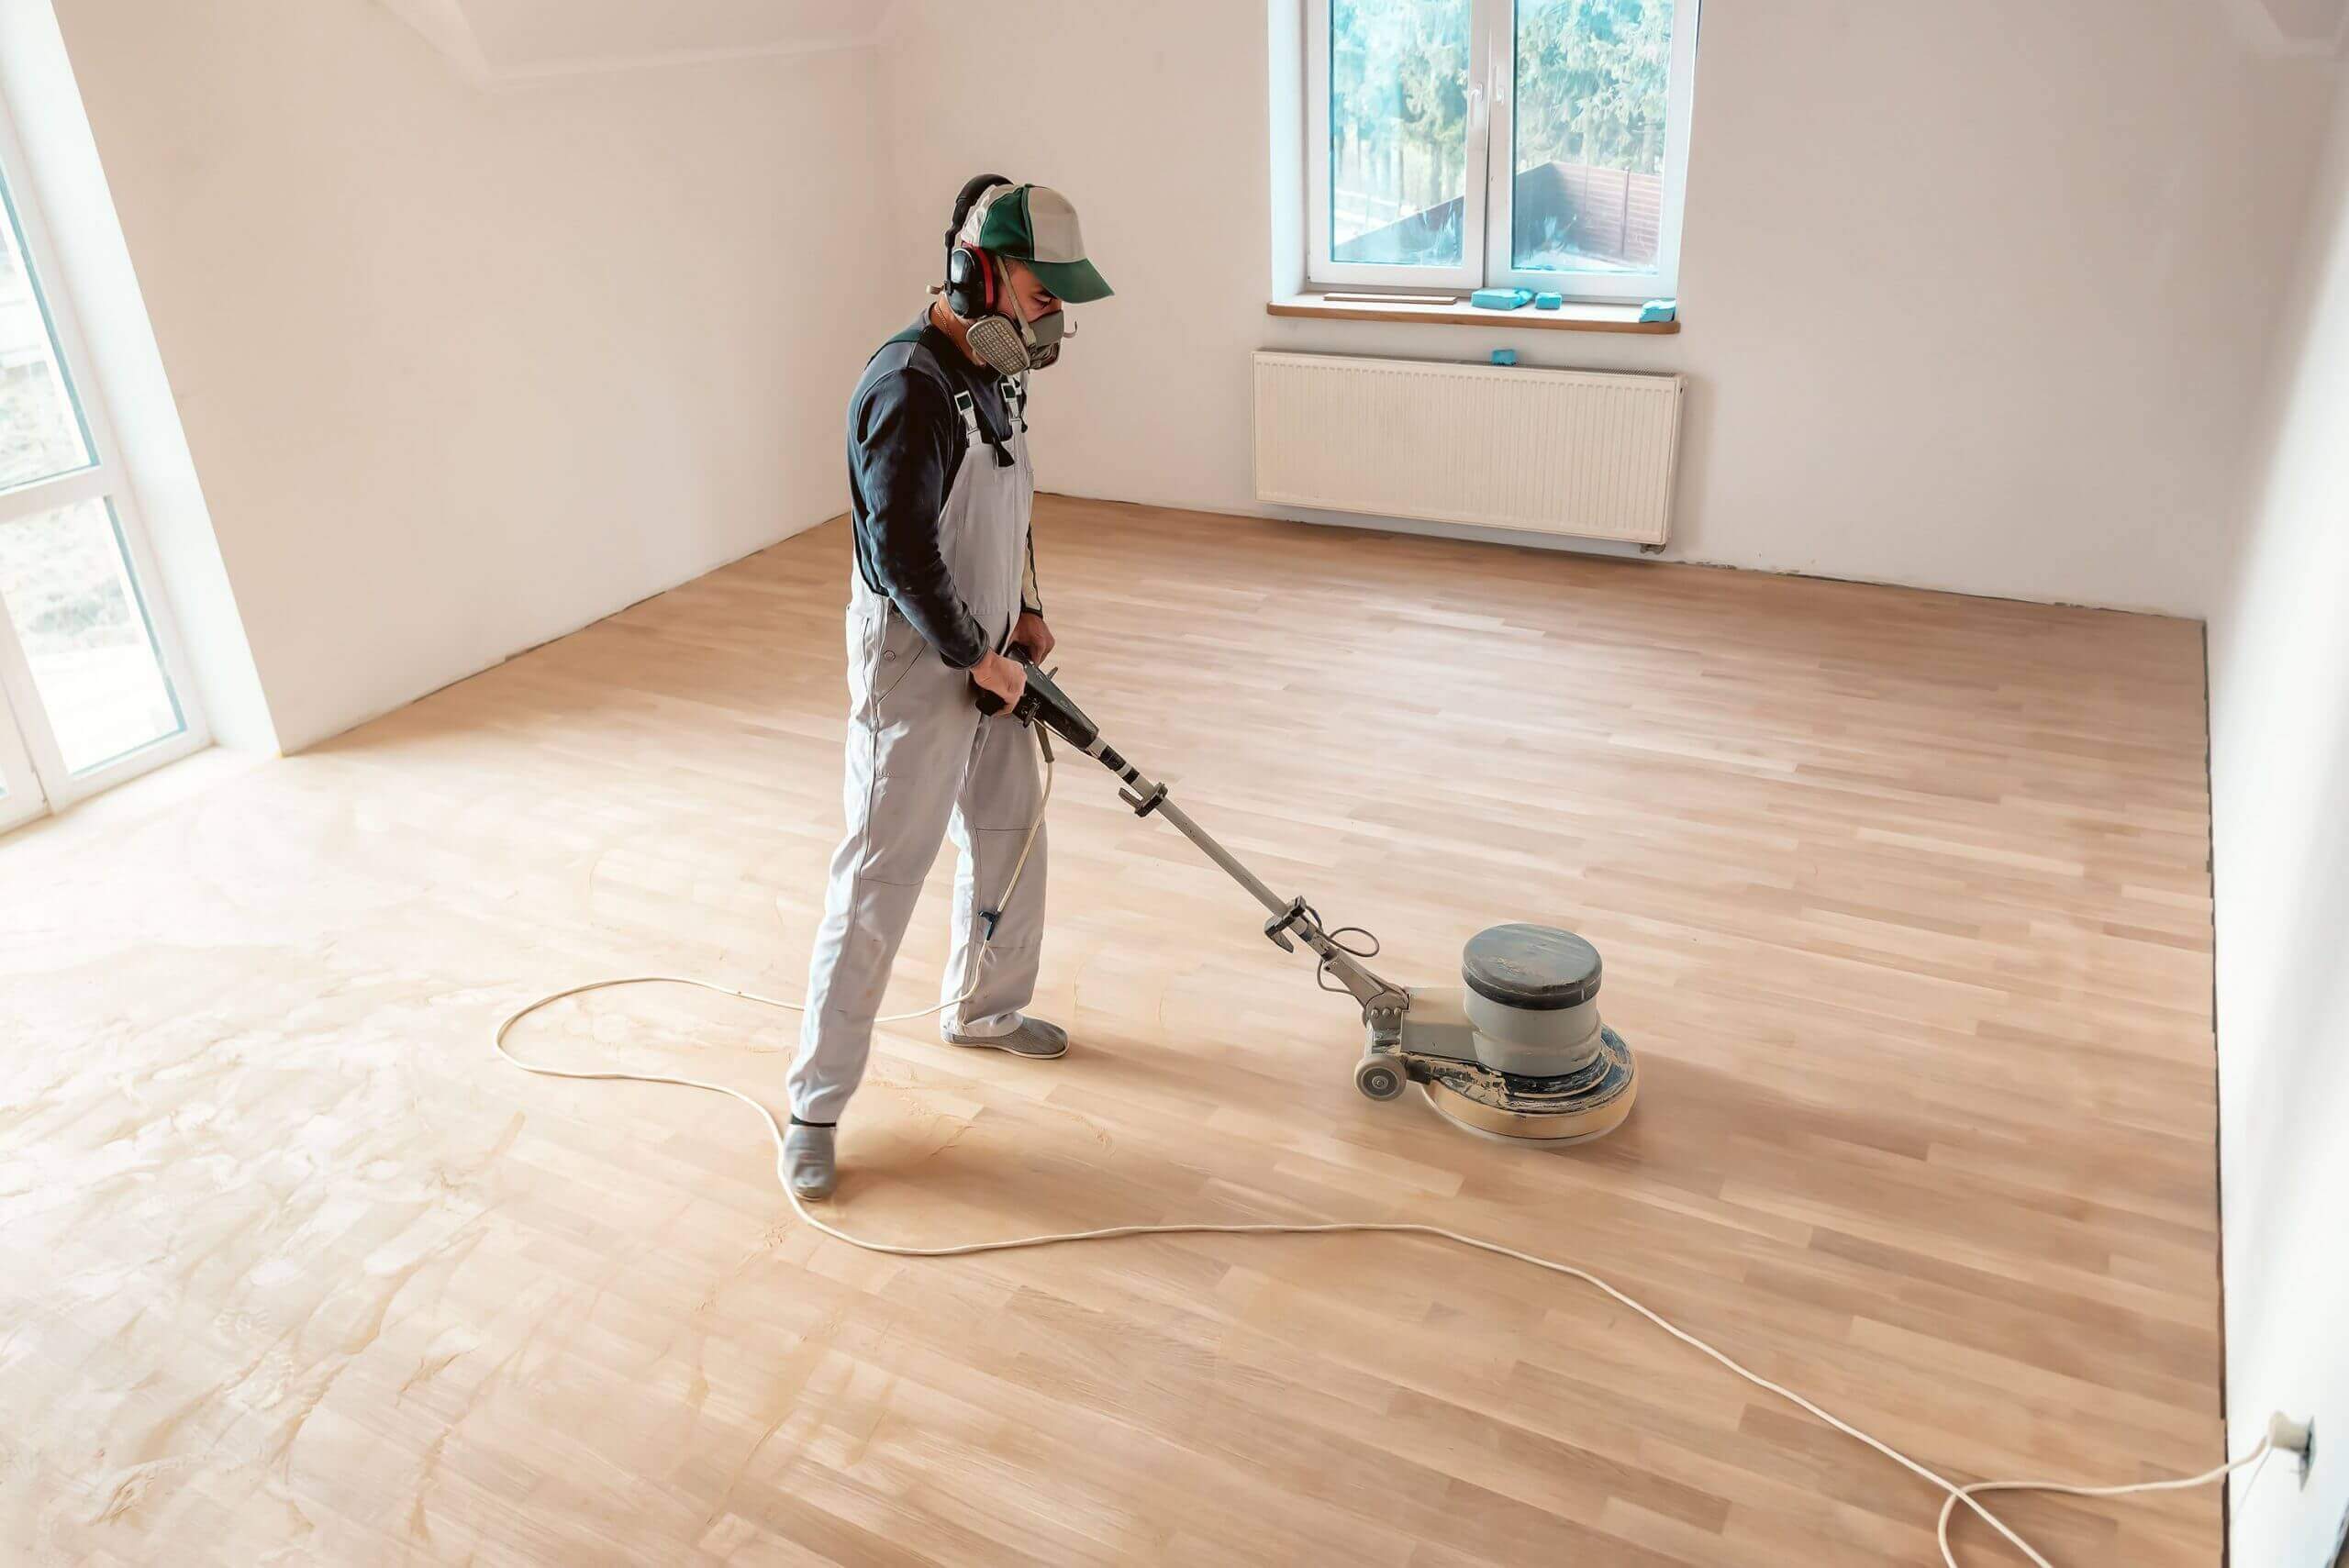 What Products Are Used When Sanding & Polishing Timber Floors